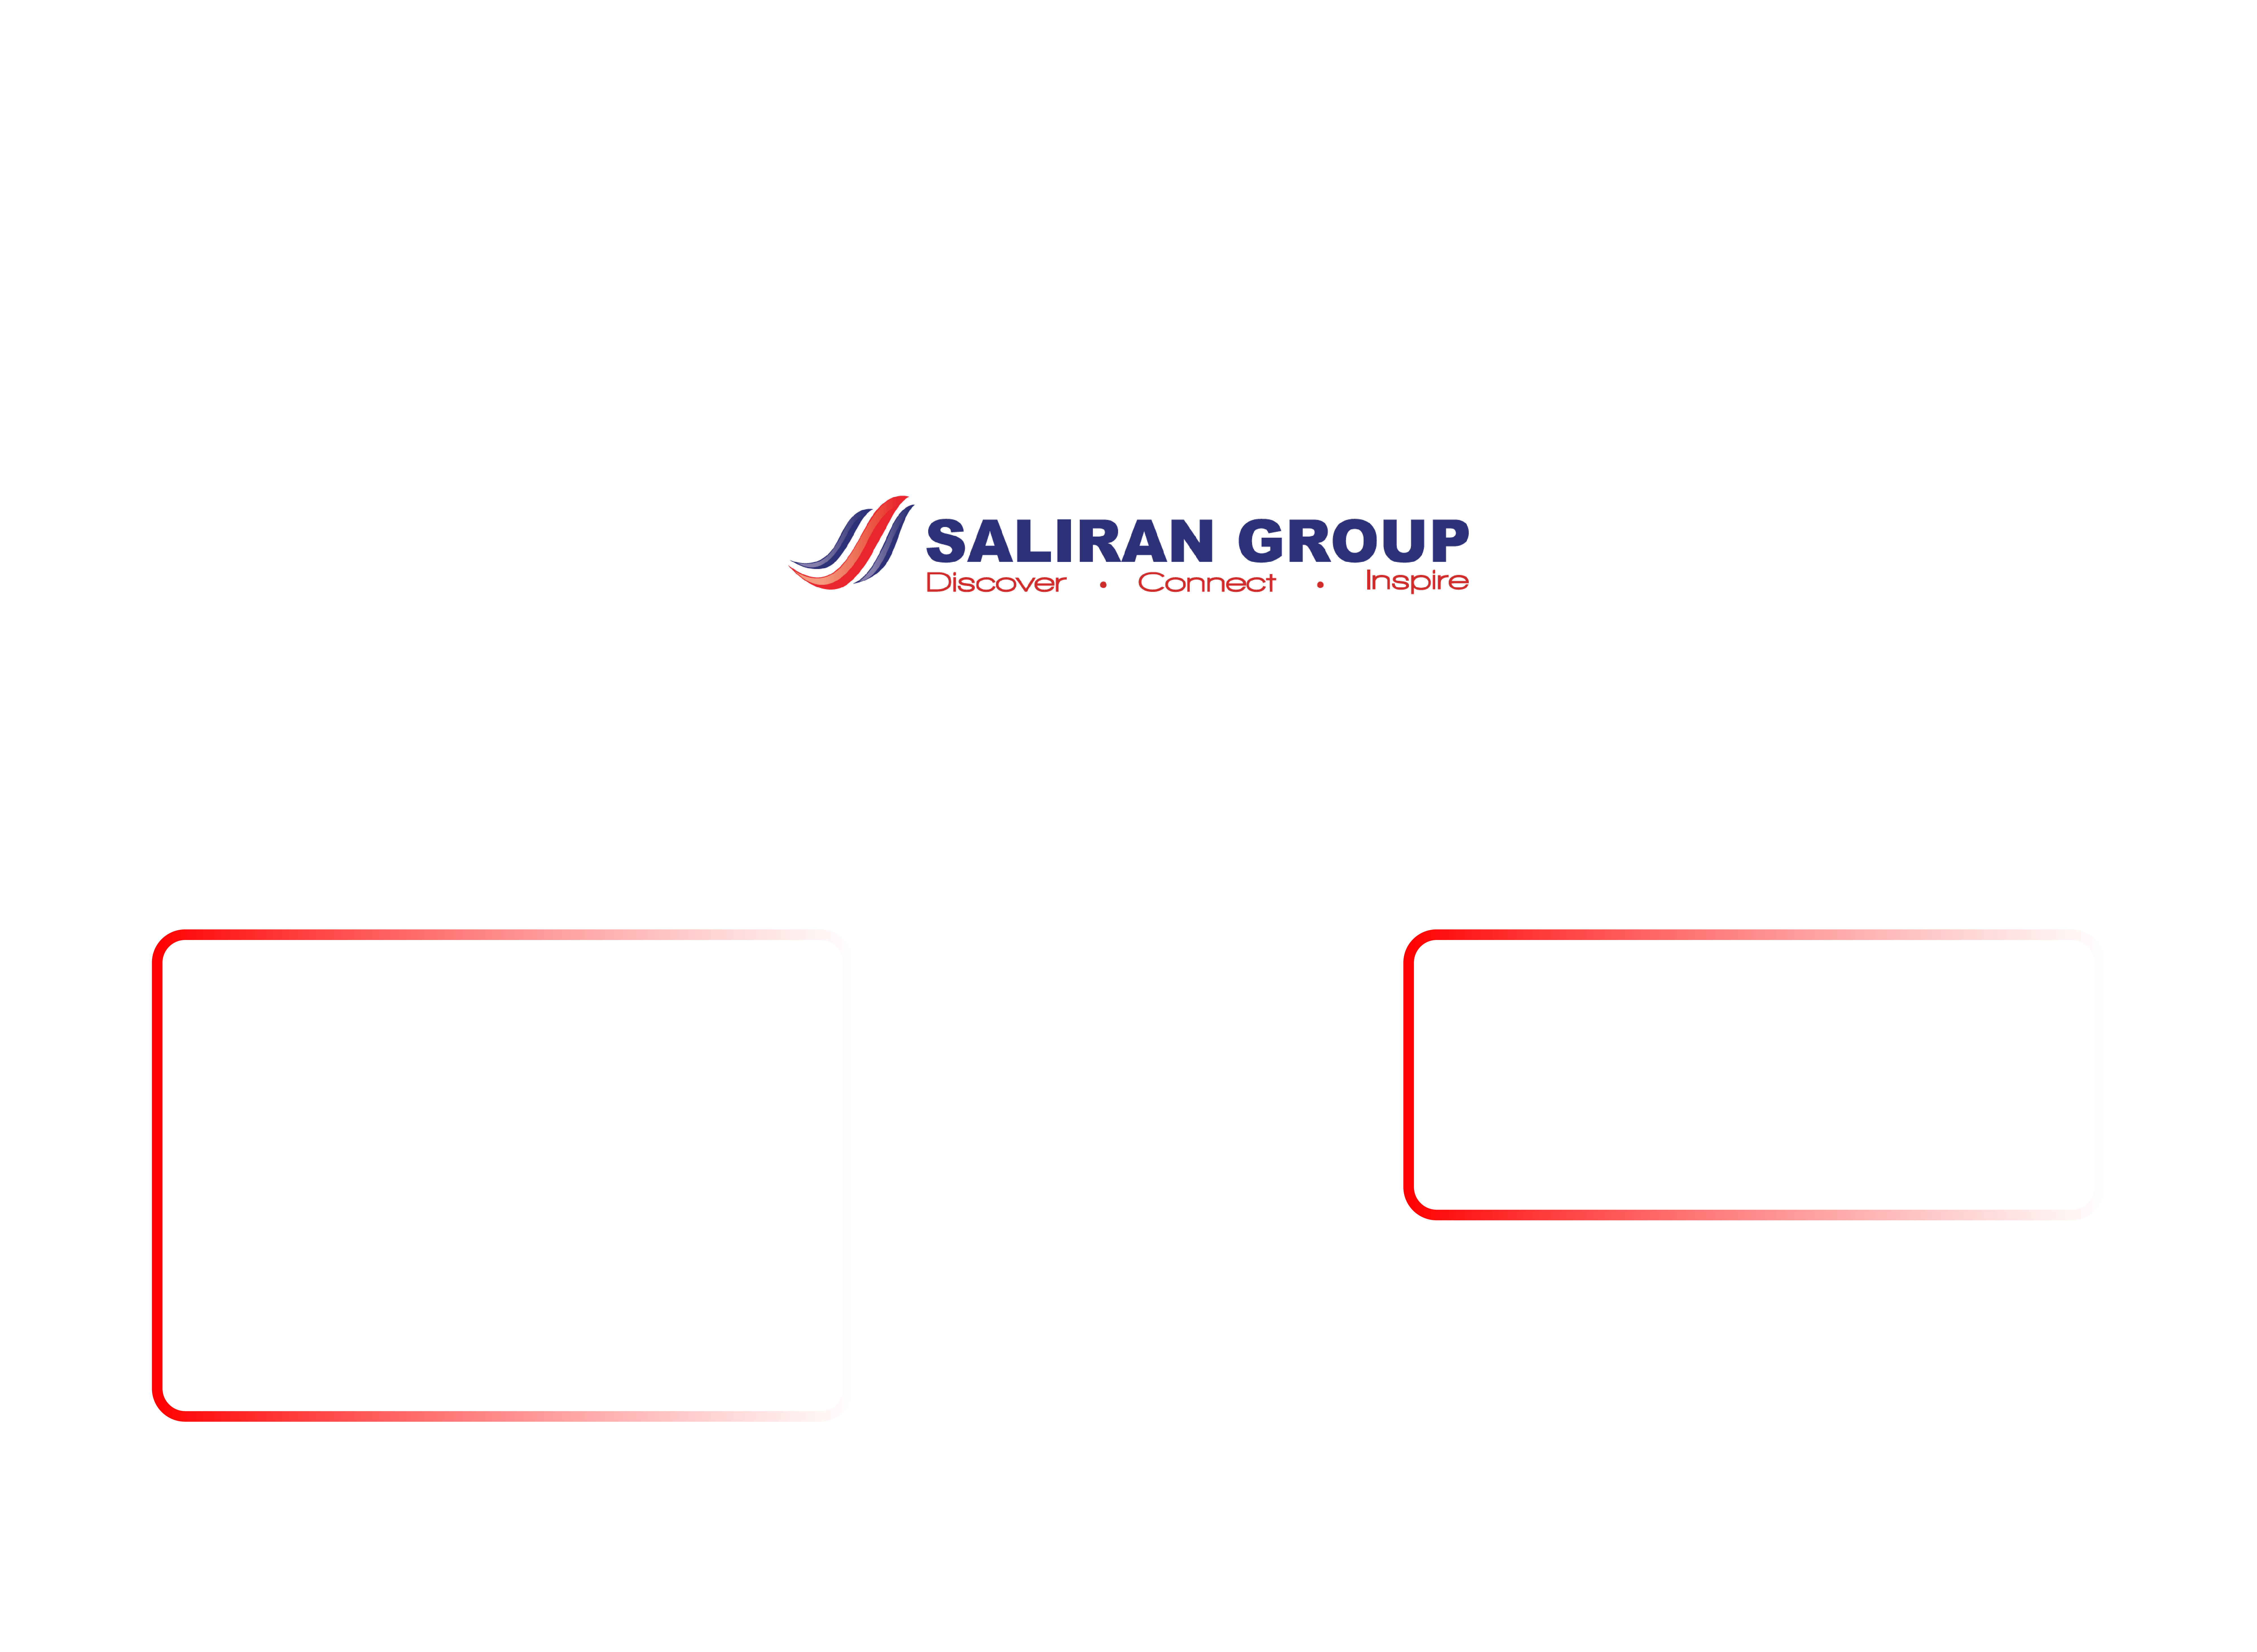 Company Structure Image